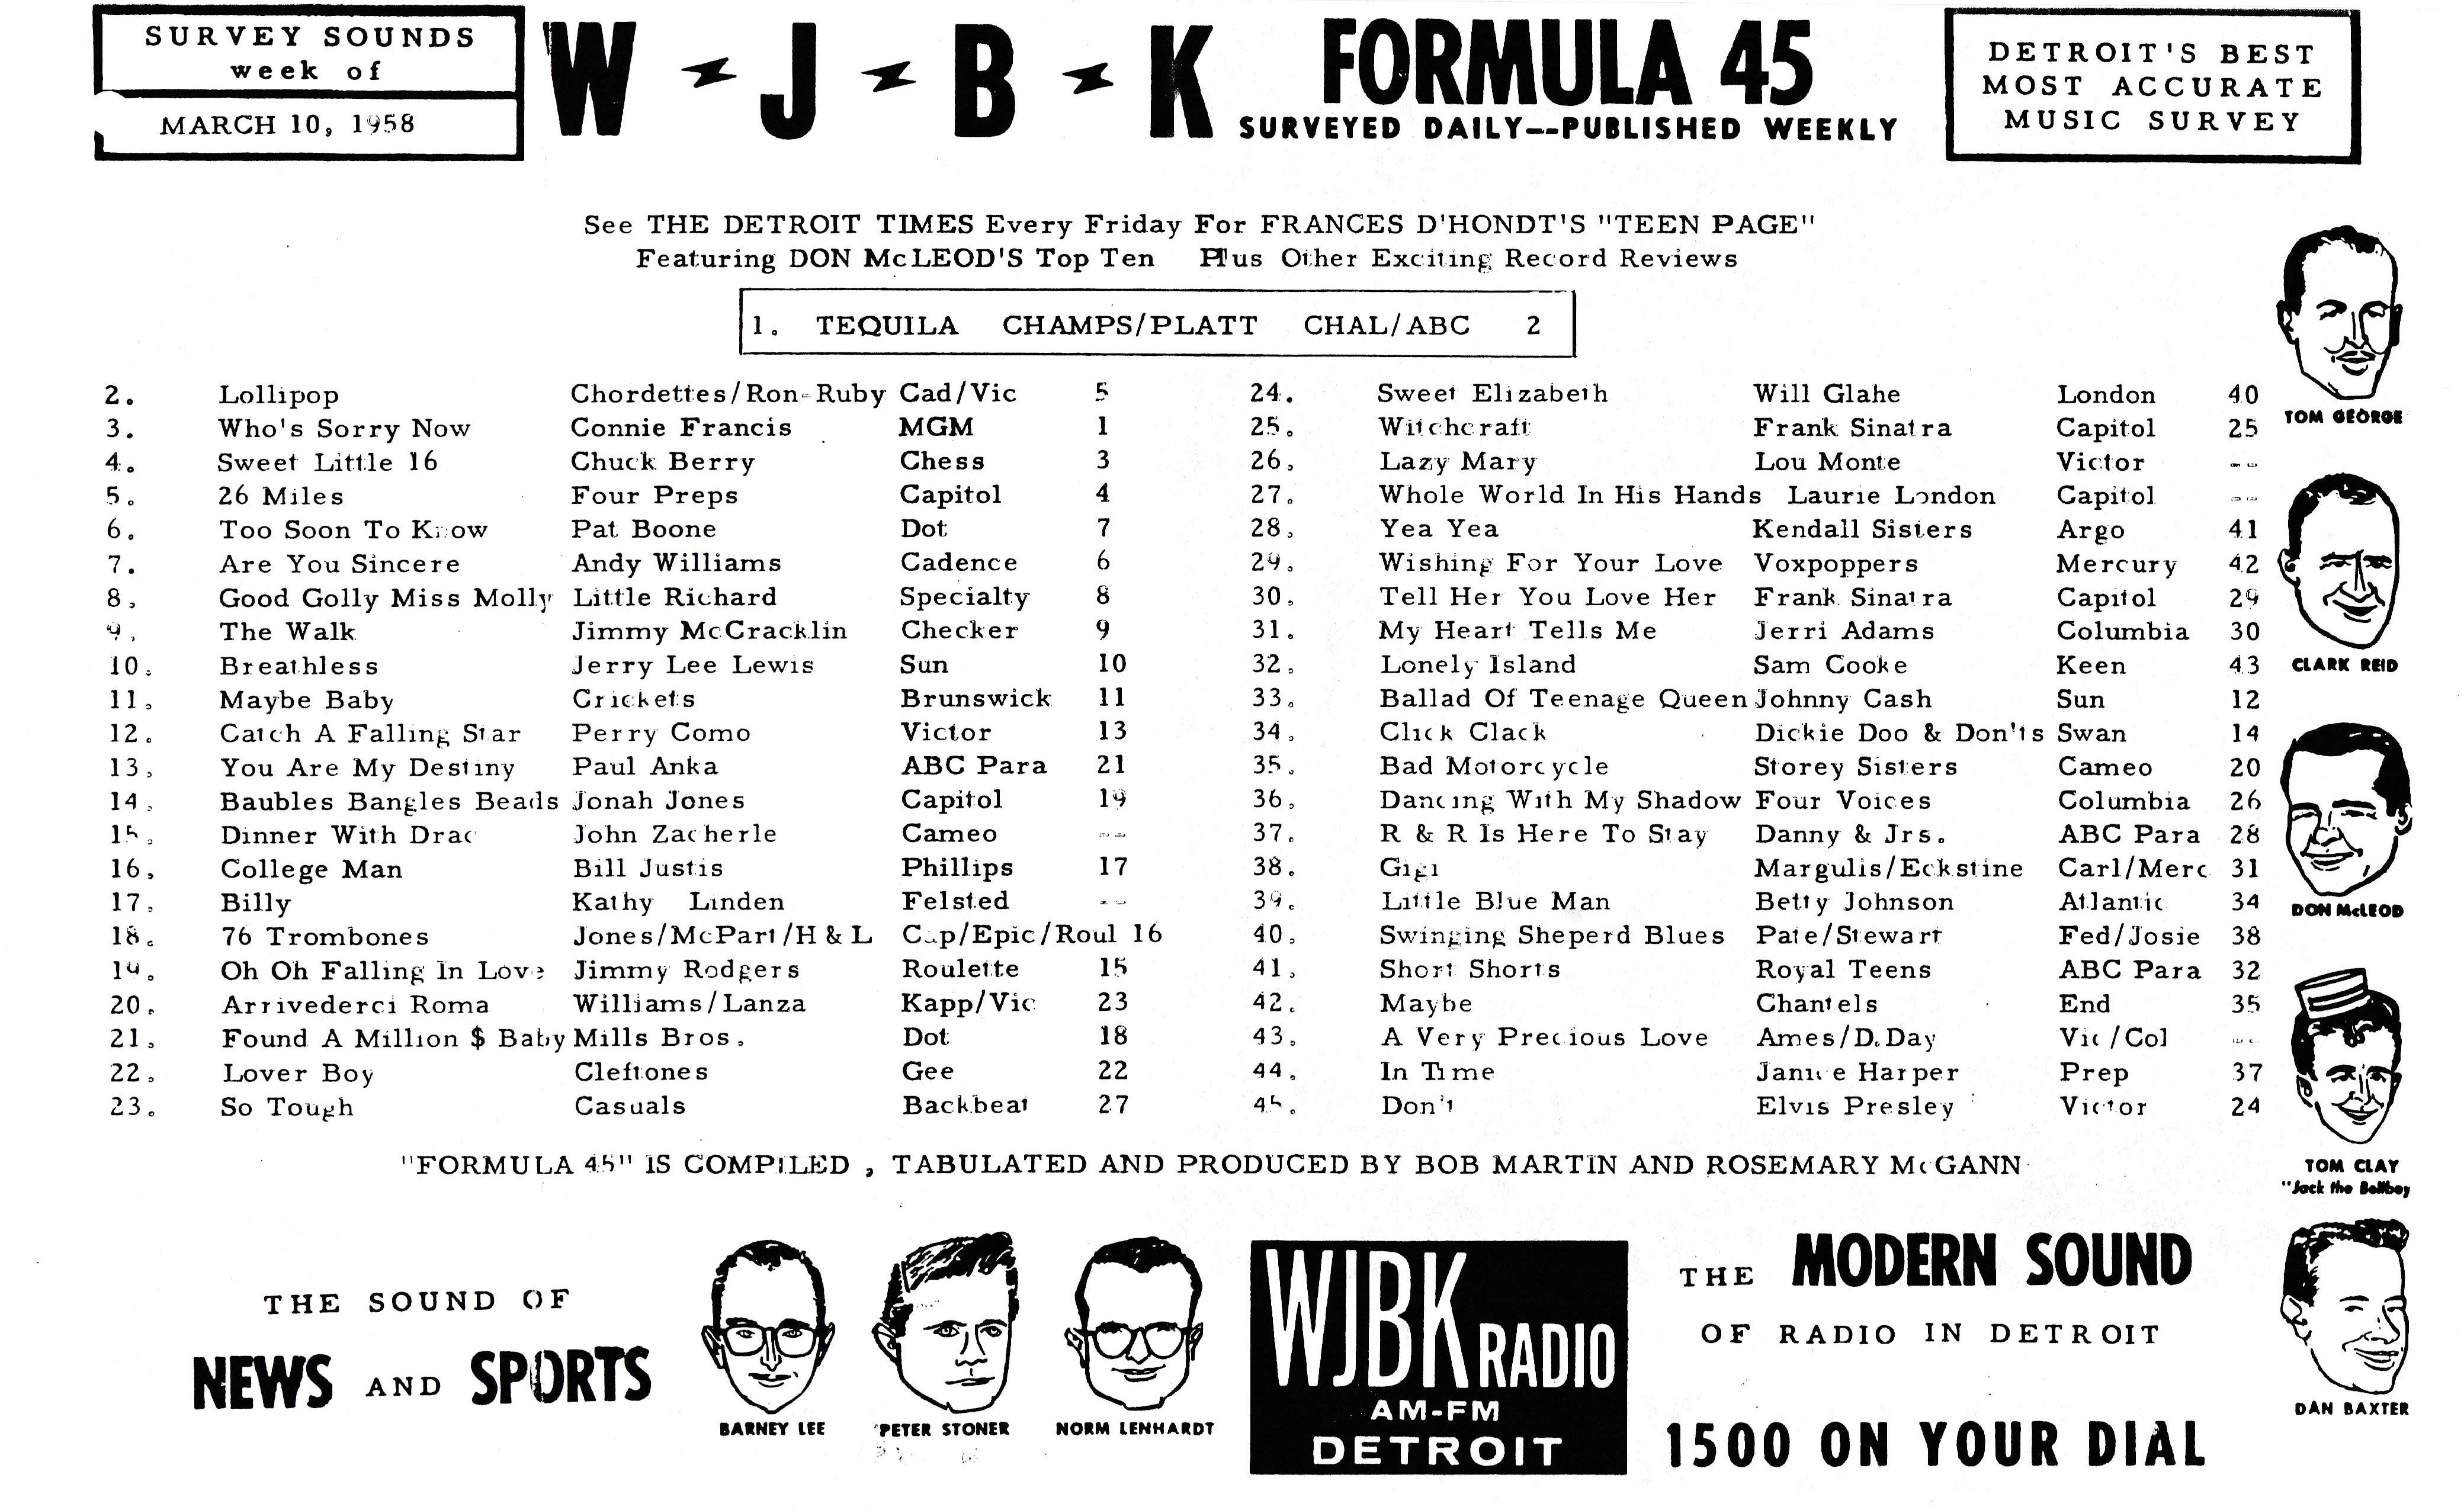 WJBK SURVEY - MARCH 10, 1958